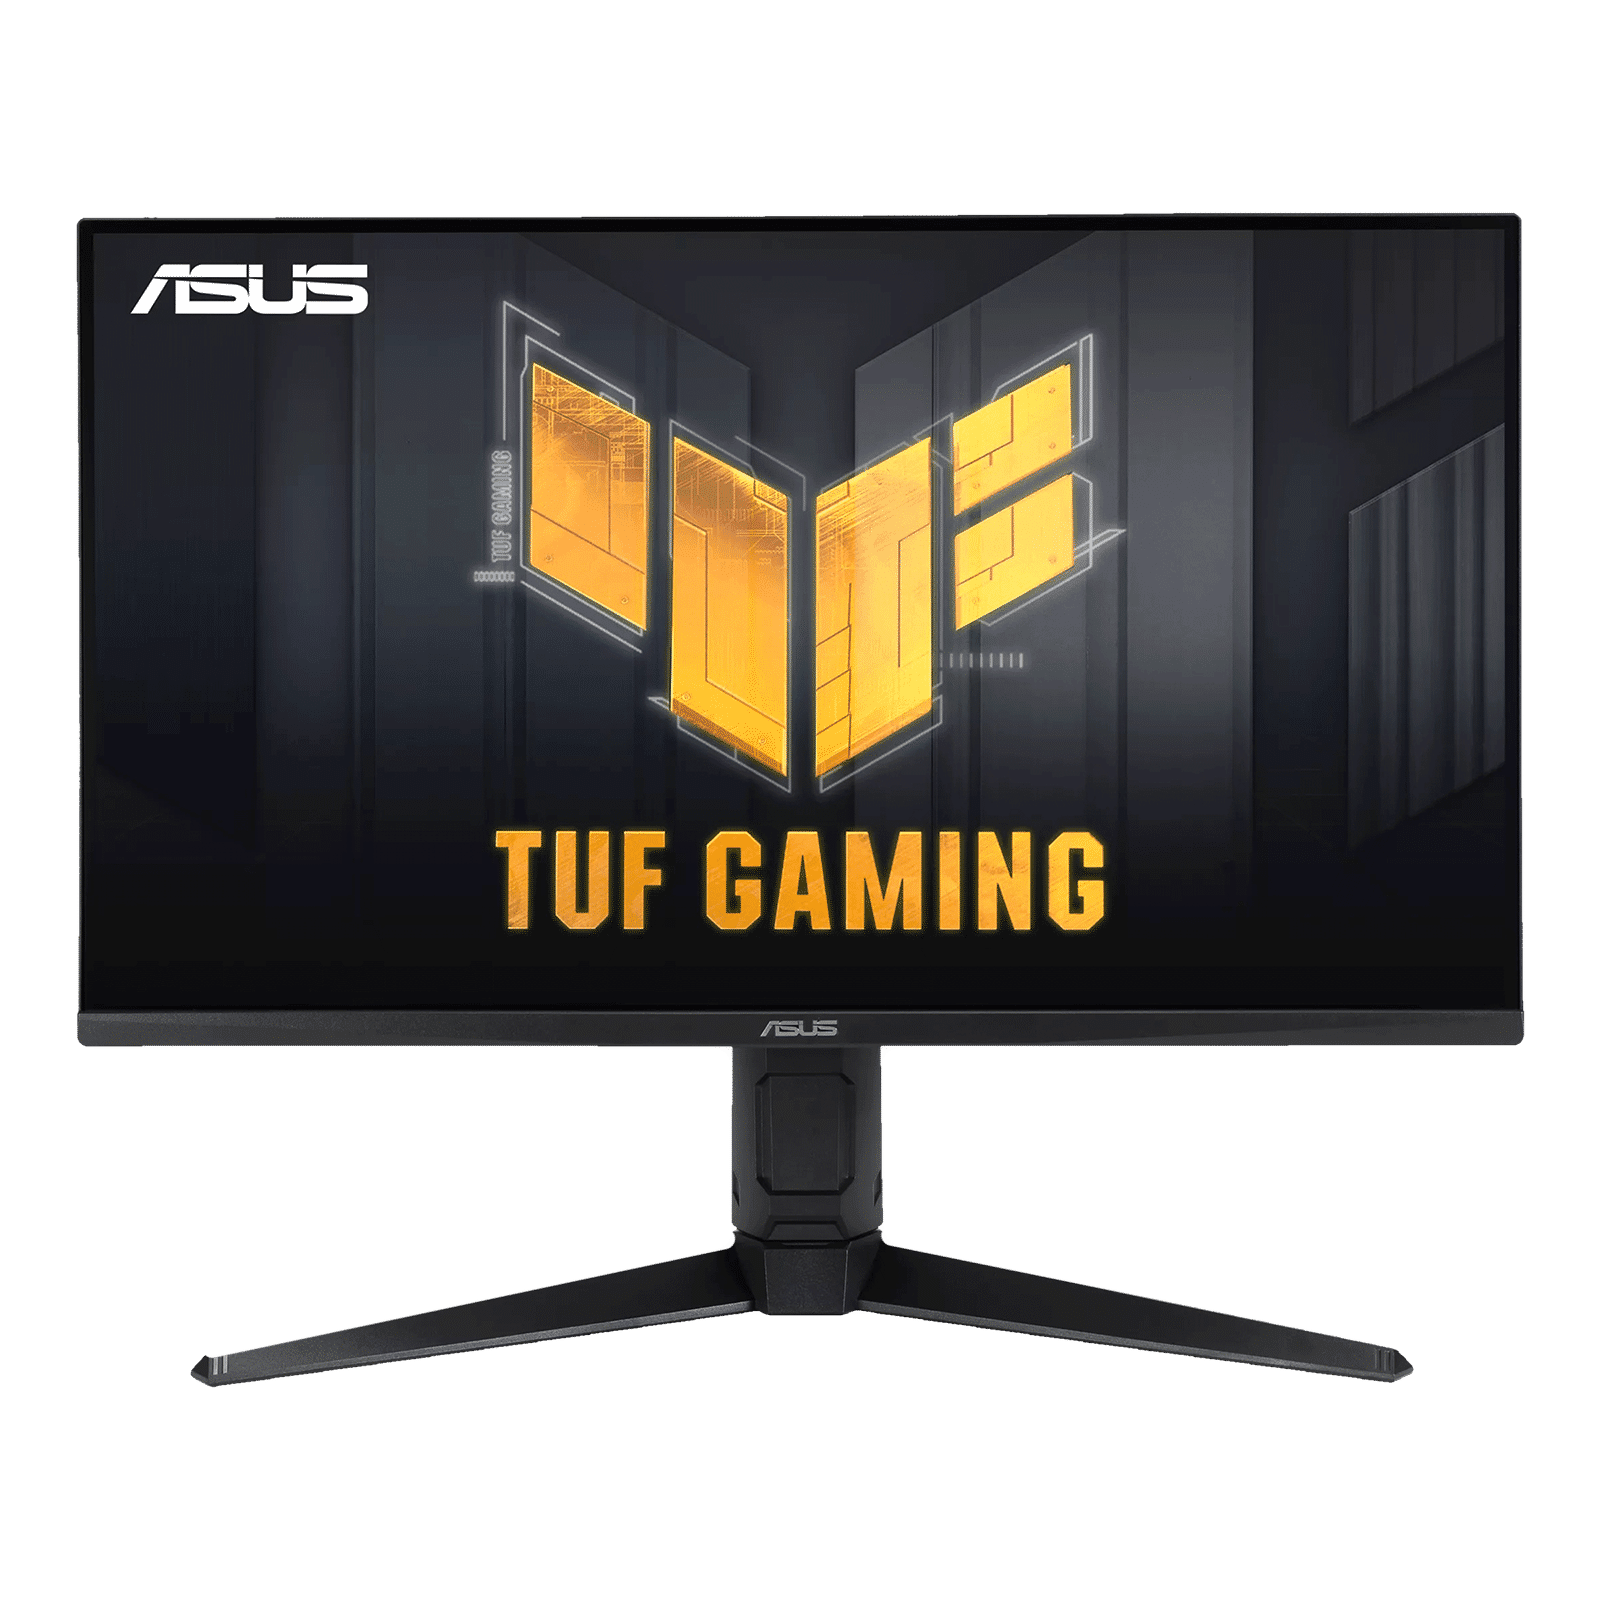 Buy ASUS TUF Gaming 71.12 cm (28 inch) Ultra HD 4K Fast IPS Panel LED  Height Adjustable Gaming Monitor with LED Backlight Online - Croma